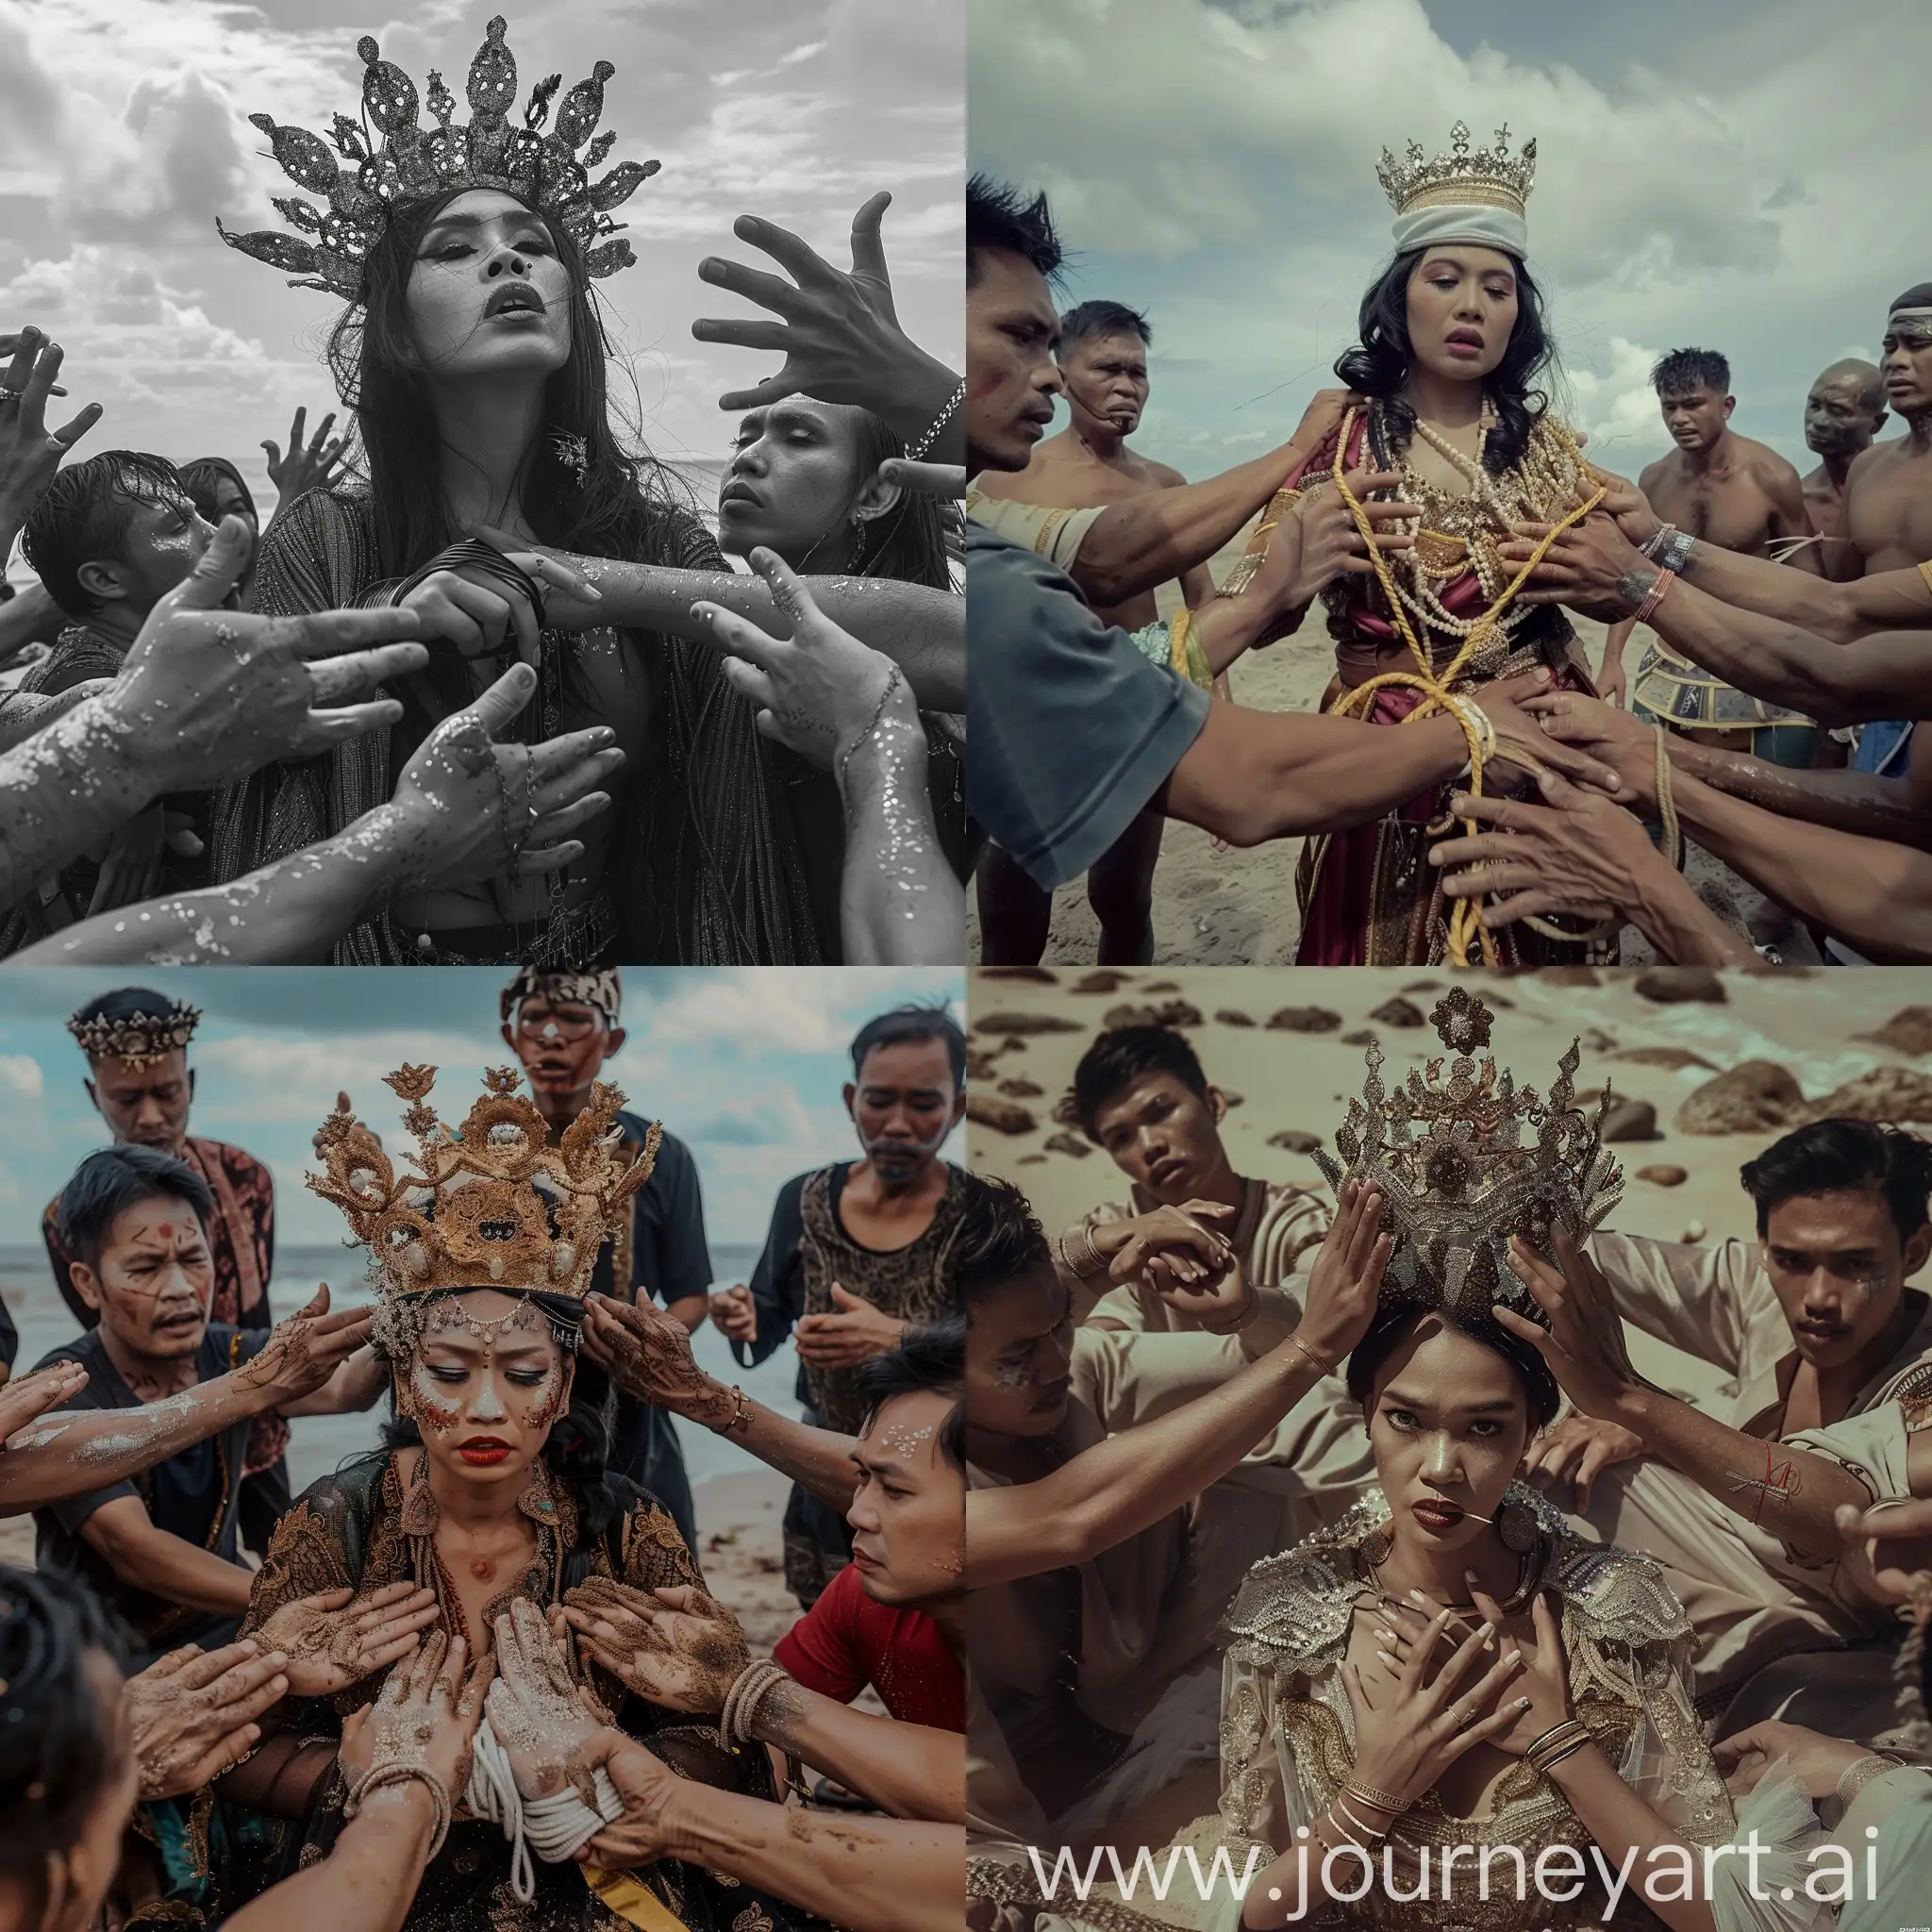 a woman dressed like Nyo Roro Kidul, wearing a crown, her hands tied and surrounded by several men, set on the beach